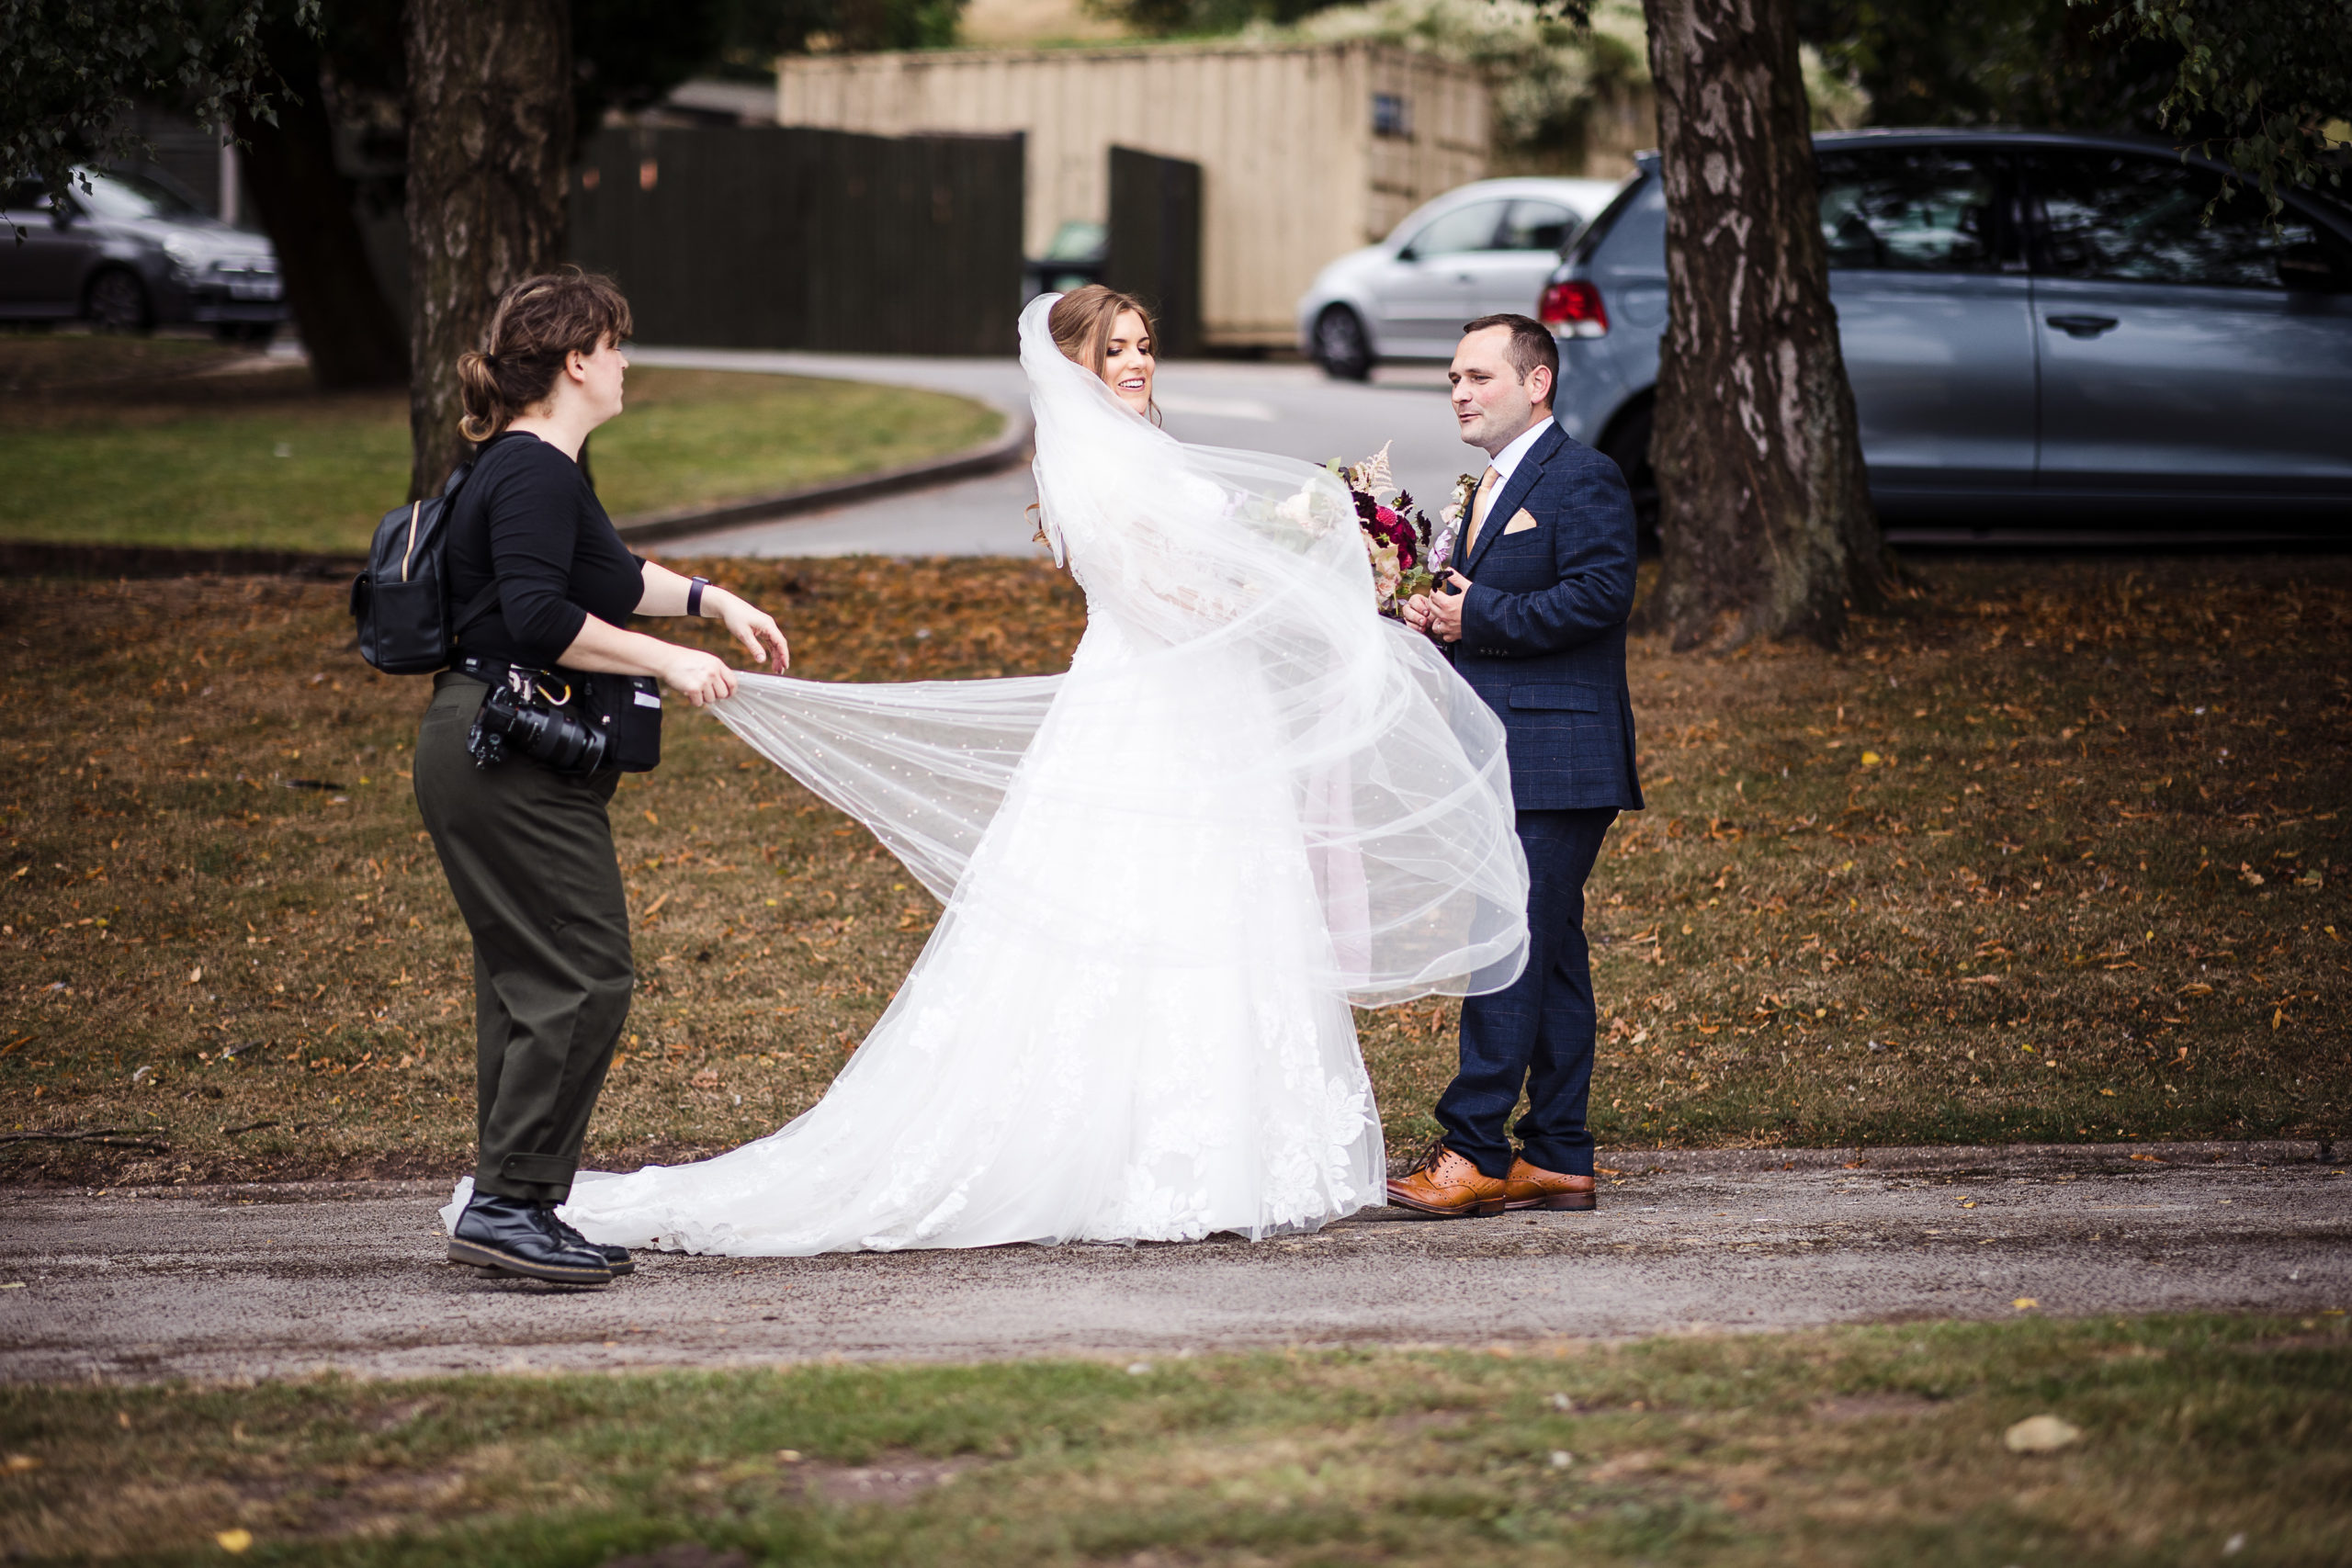 Laura May Photography adjusting a brides veil at a wedding before photographing her stood next to her husband